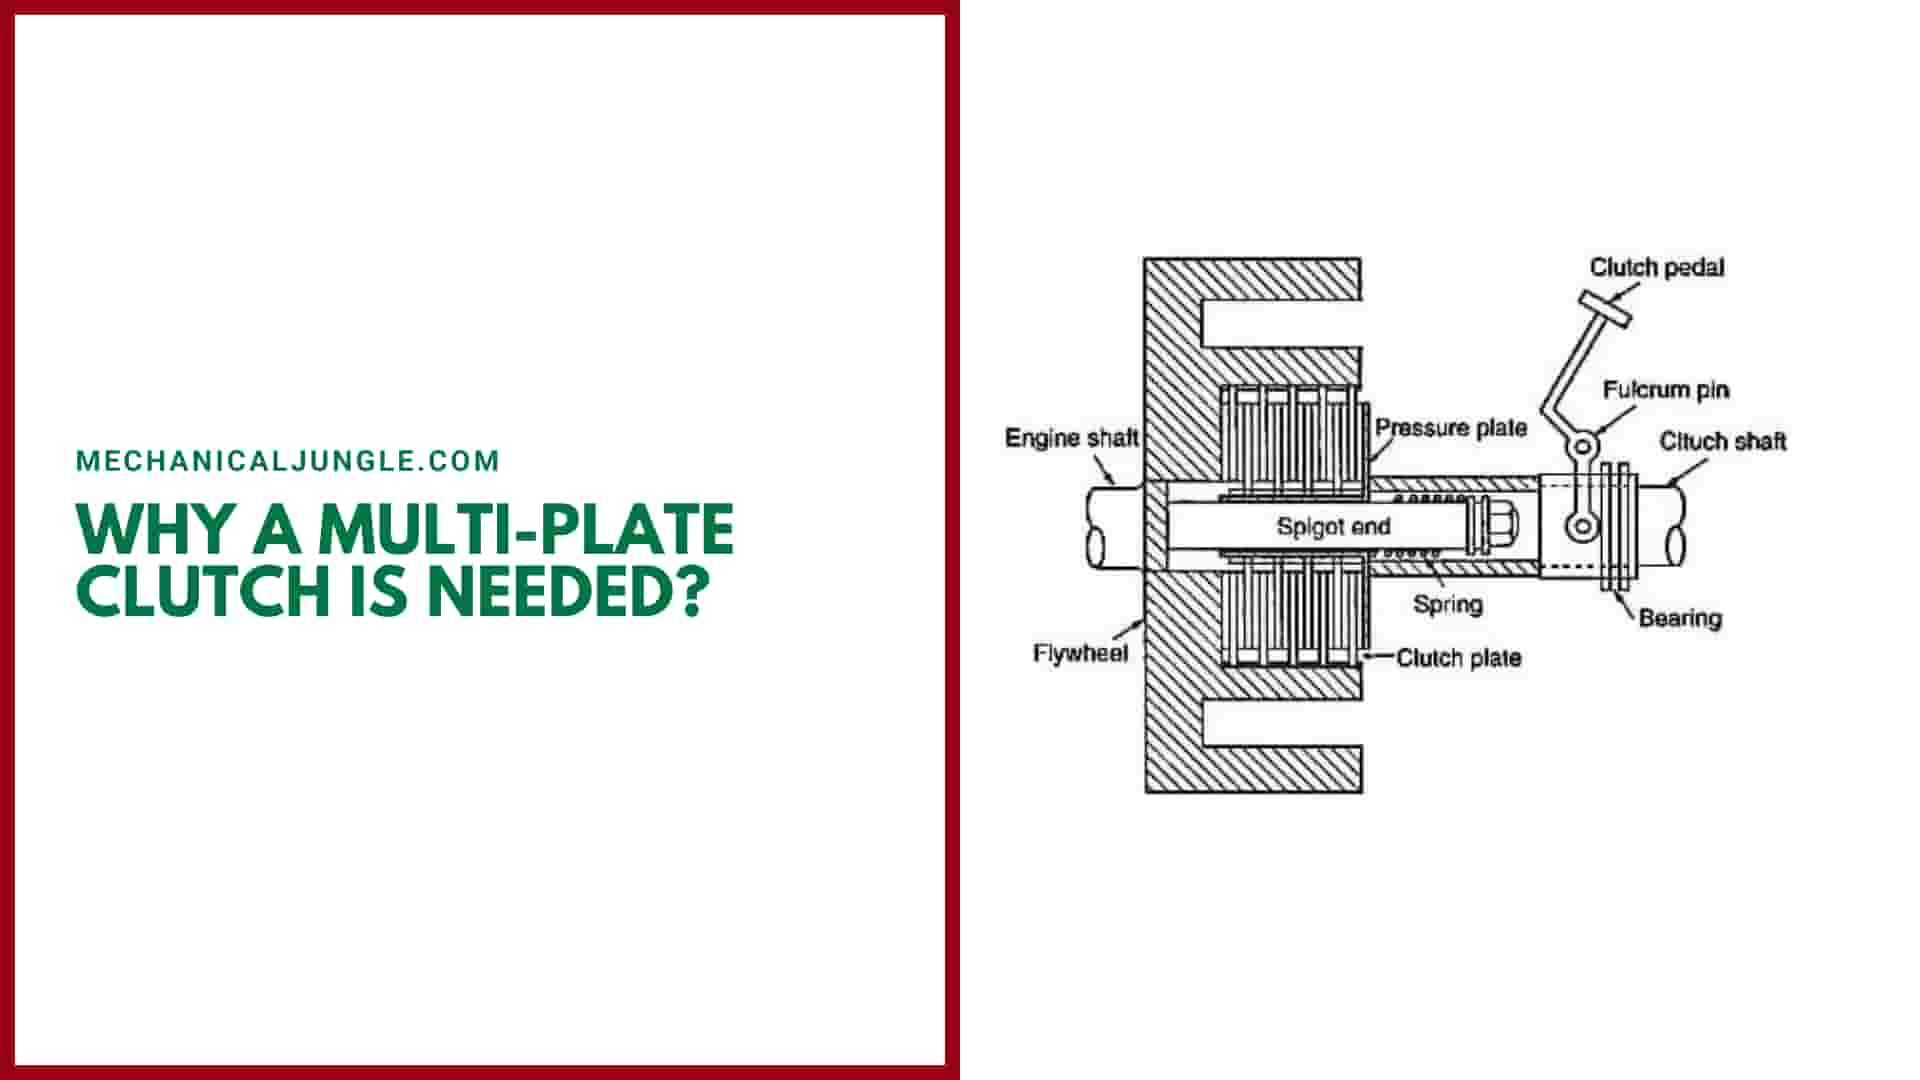 Why a Multi-Plate Clutch Is Needed?